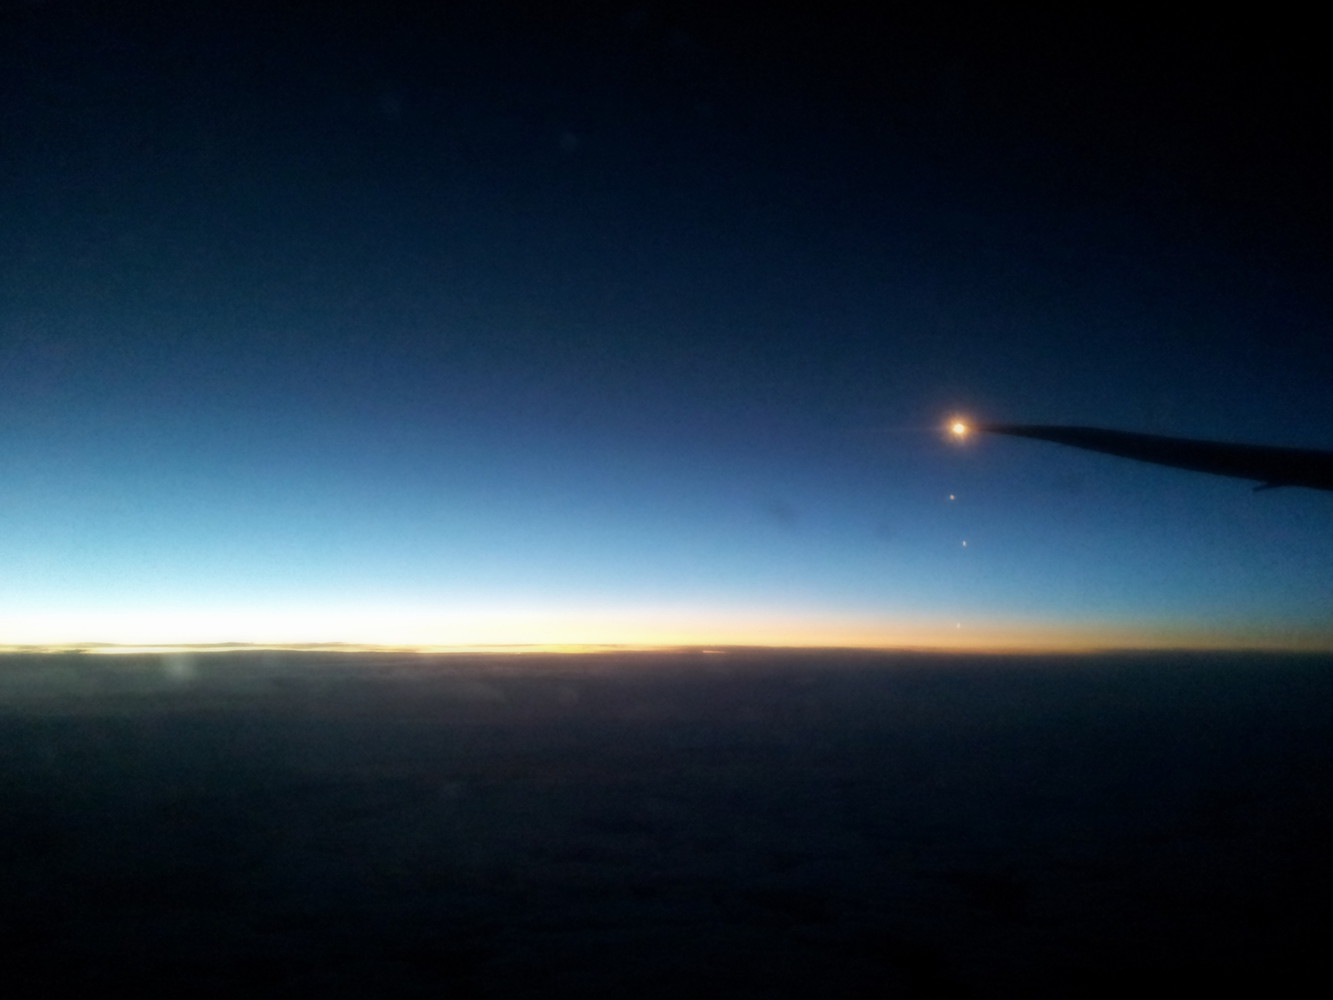 Silhouette of the wing of an airplane against a dimly lit horizon at dawn as seen from the passenger seat of an airplane